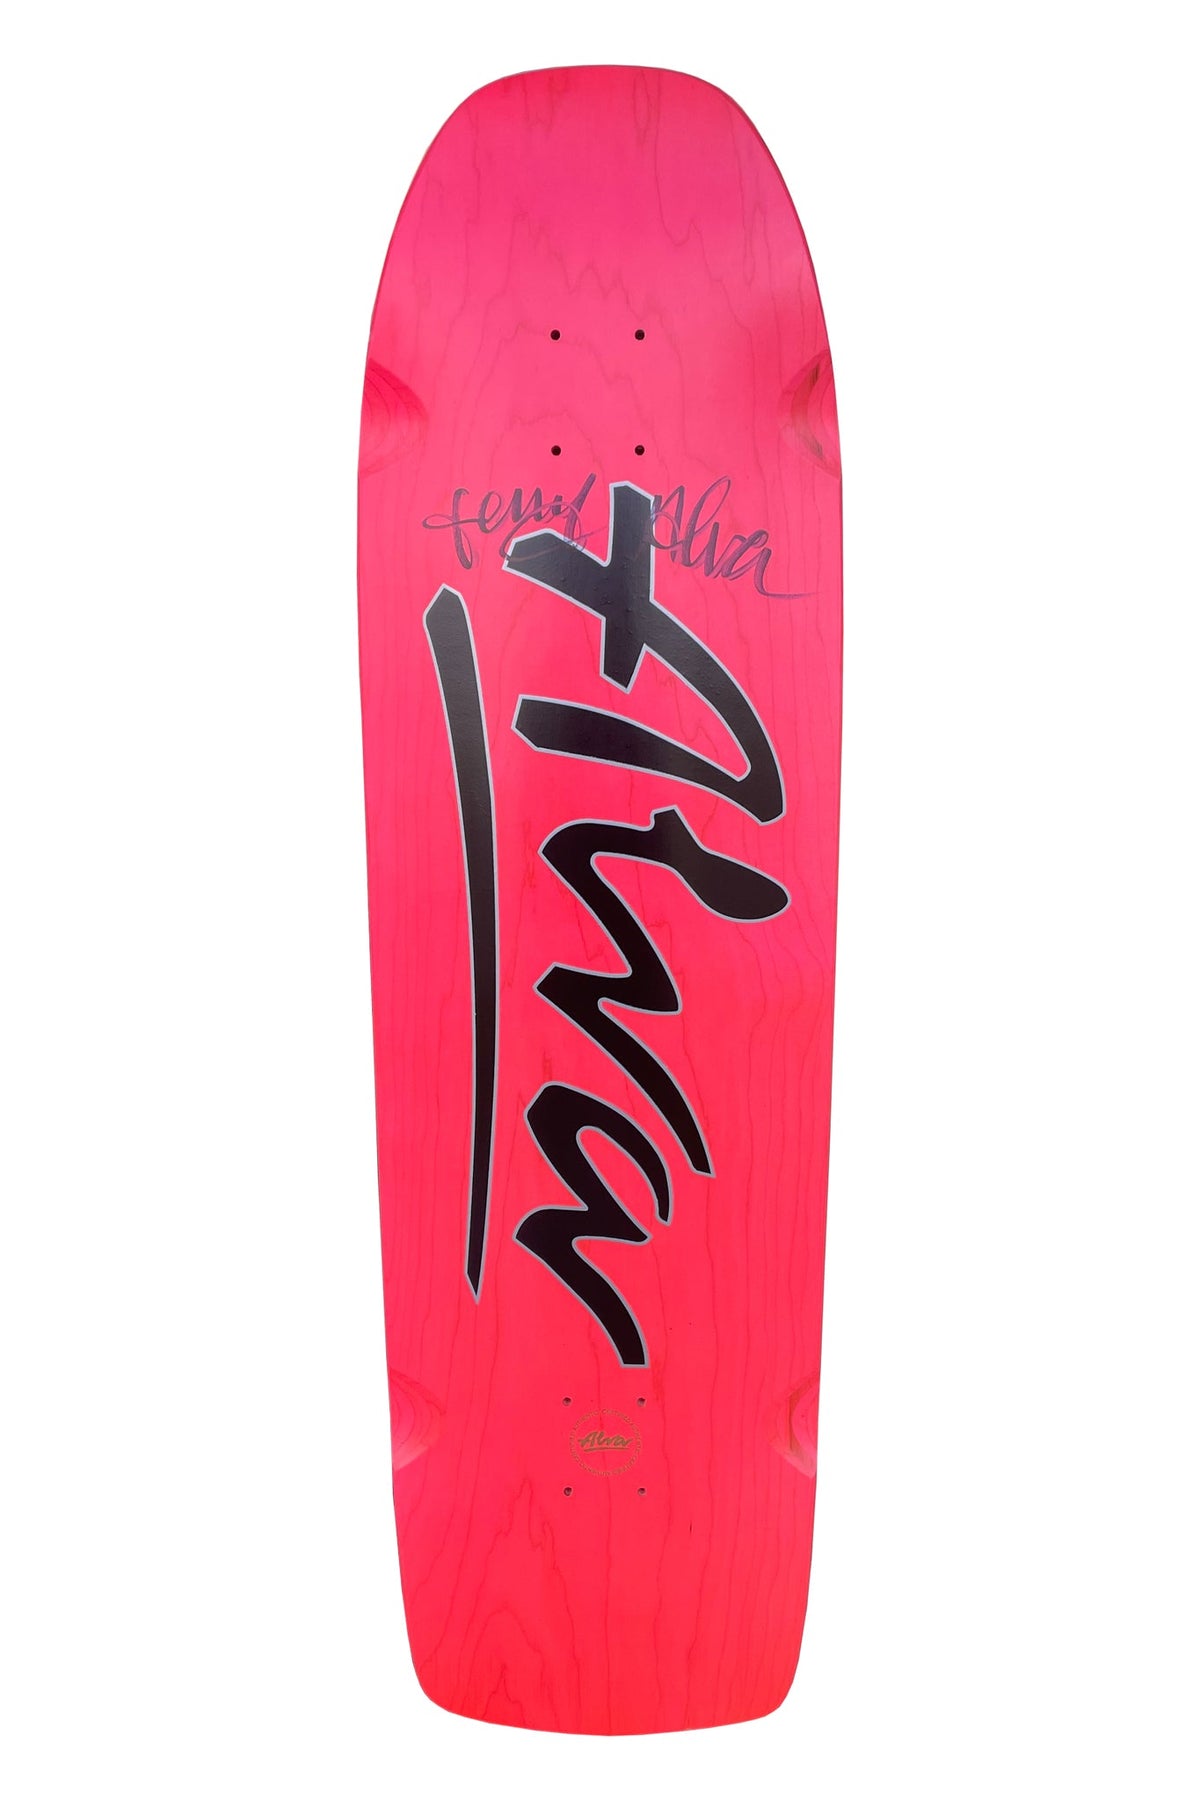 TONY ALVA SIGNED SHORT STUFF PINK WITH SILVER